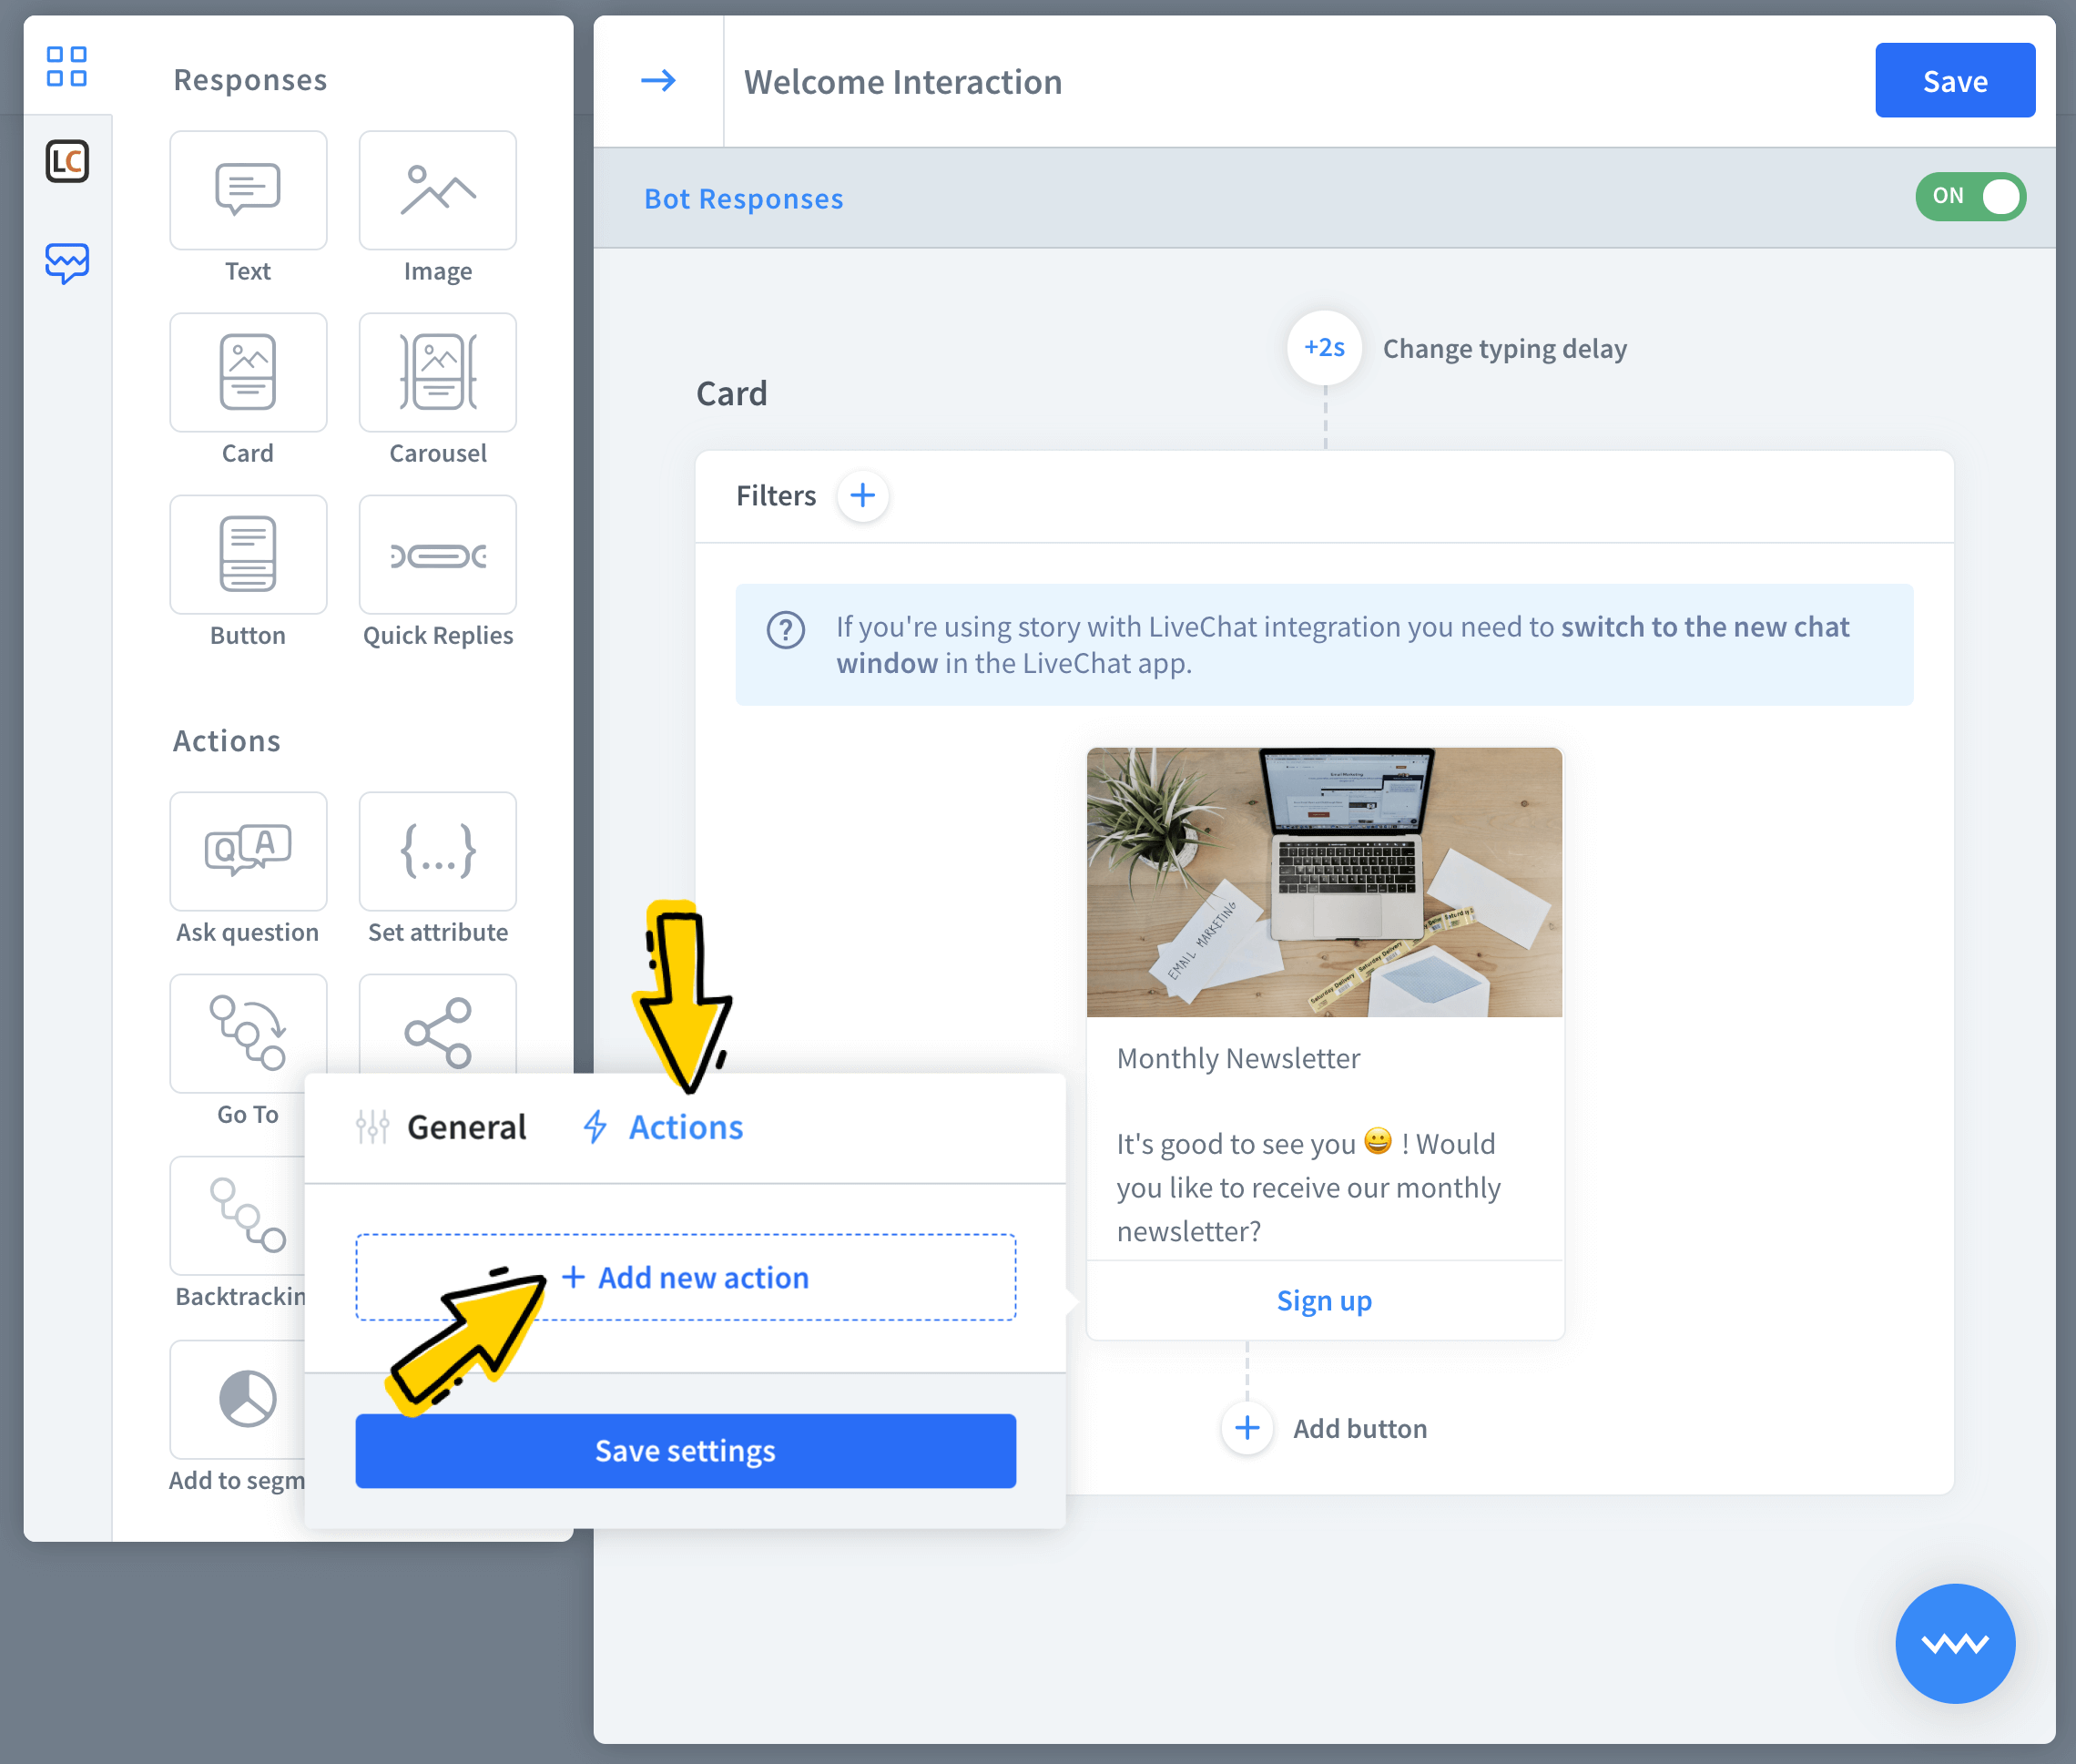 Click on add new action button to get started with actions.